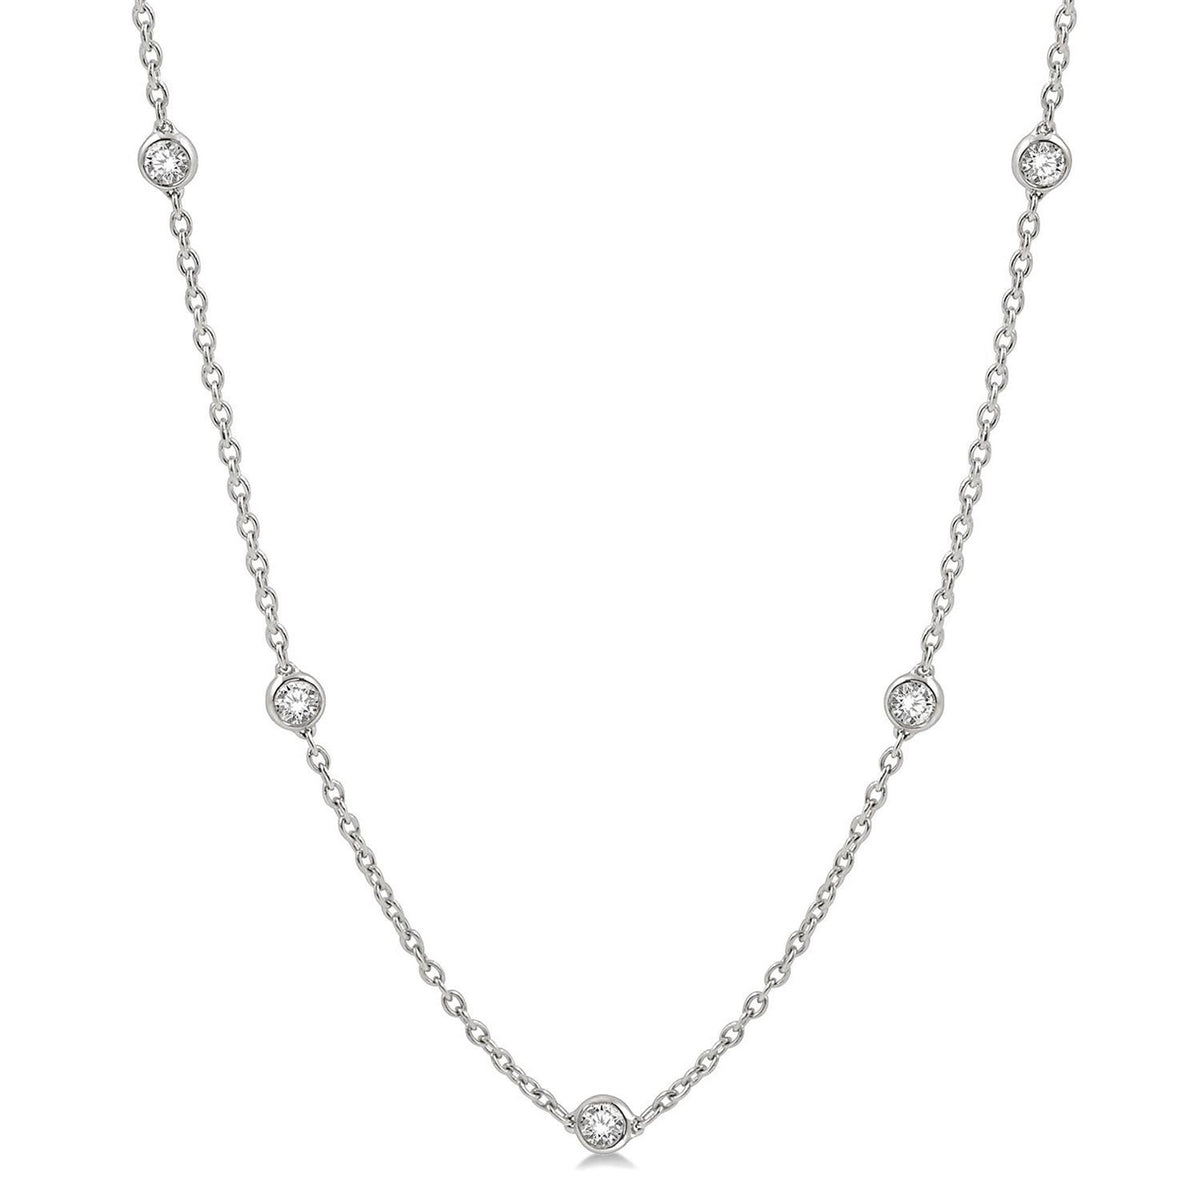 Milestone 14Kt White Gold Diamonds-By-The-Yard Necklace With 1.50cttw Natural Diamonds